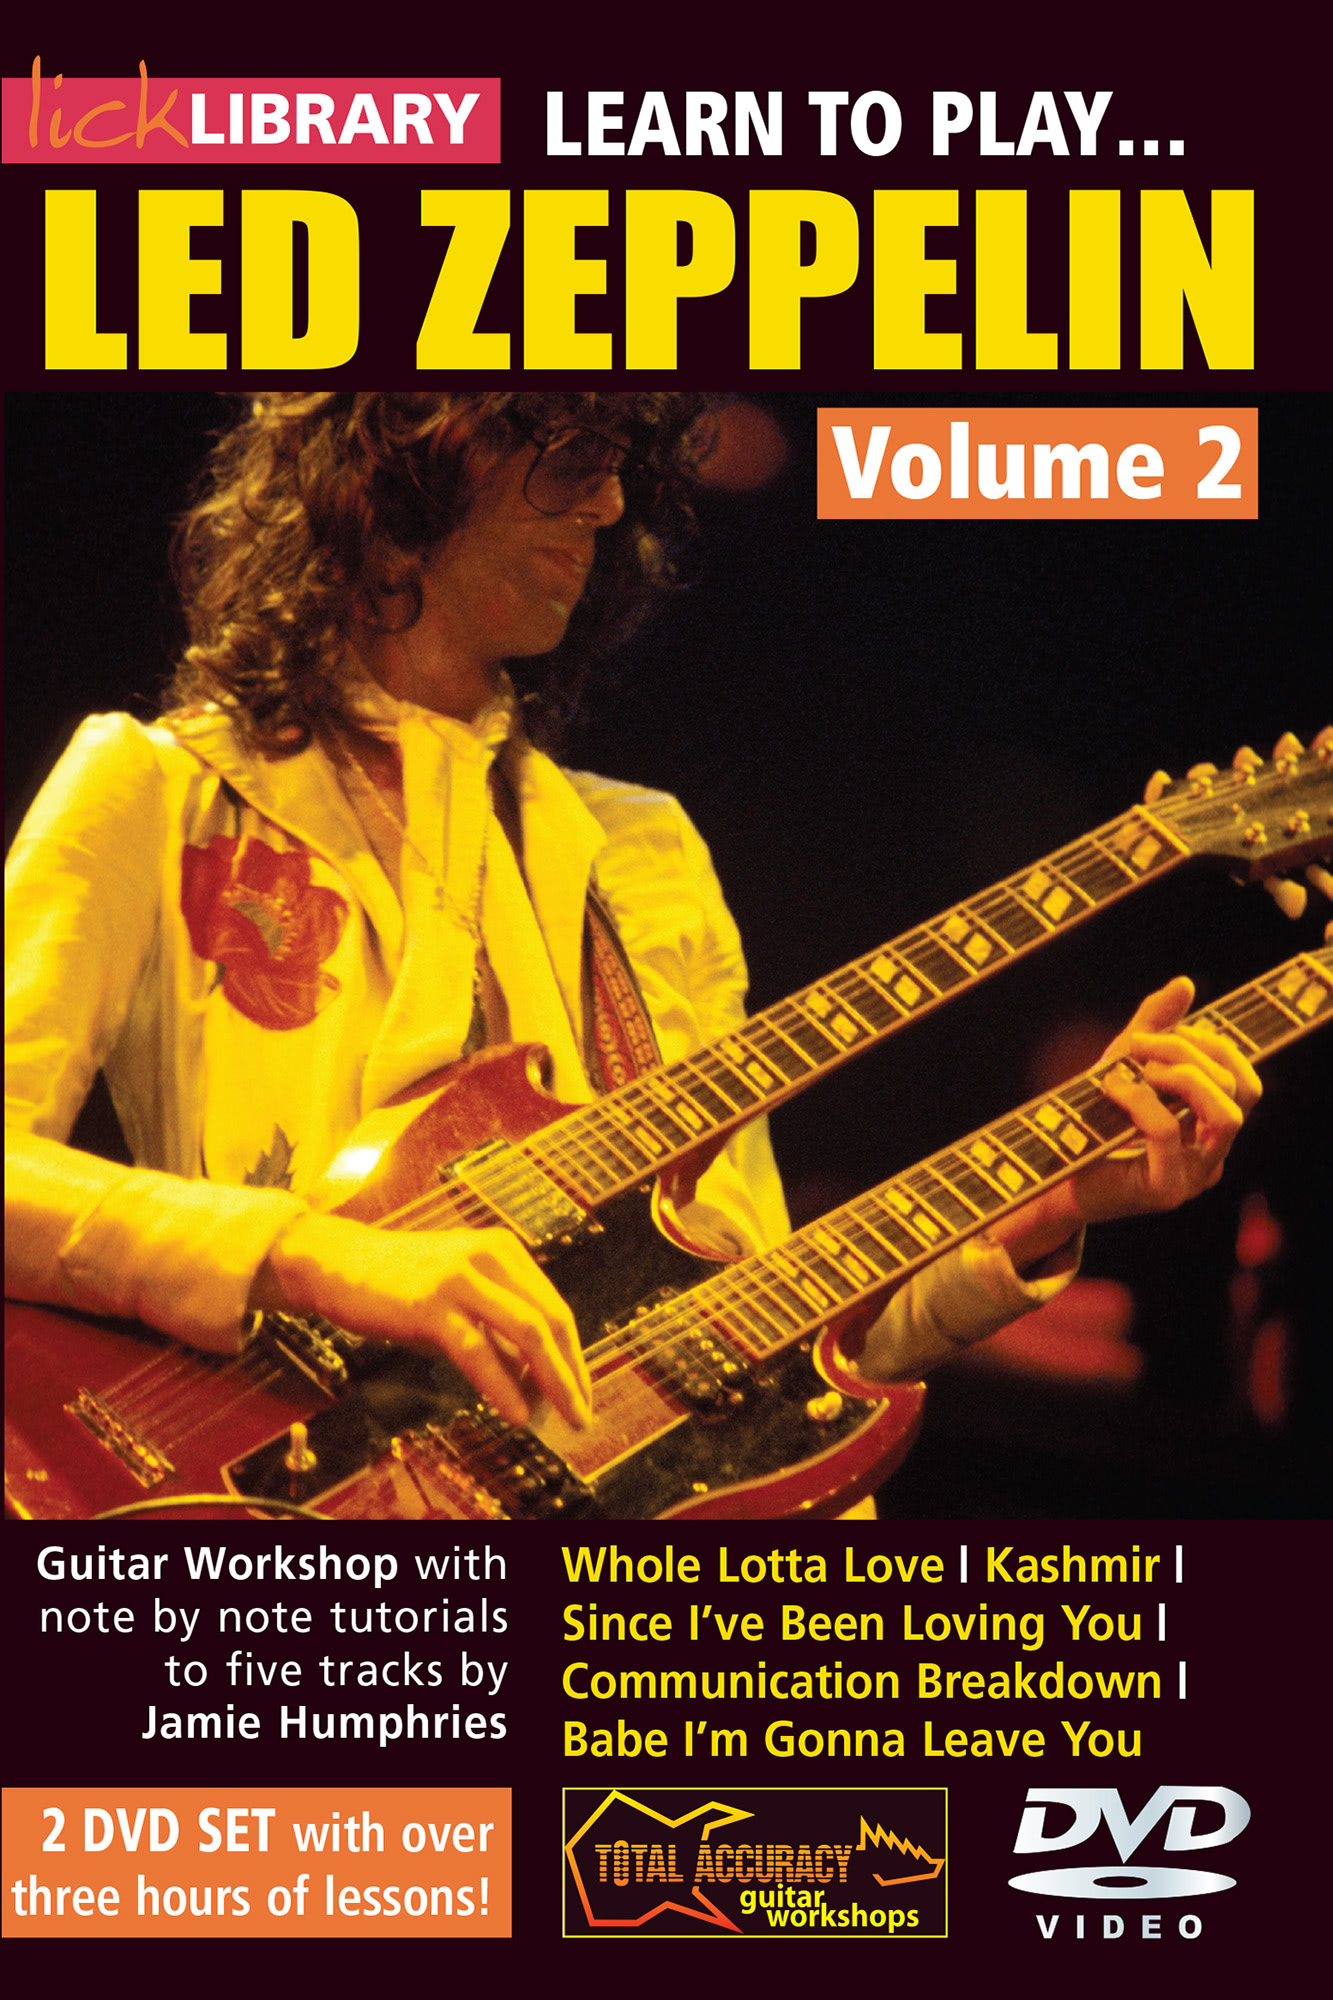 Learn To Play Led Zeppelin Volume 2